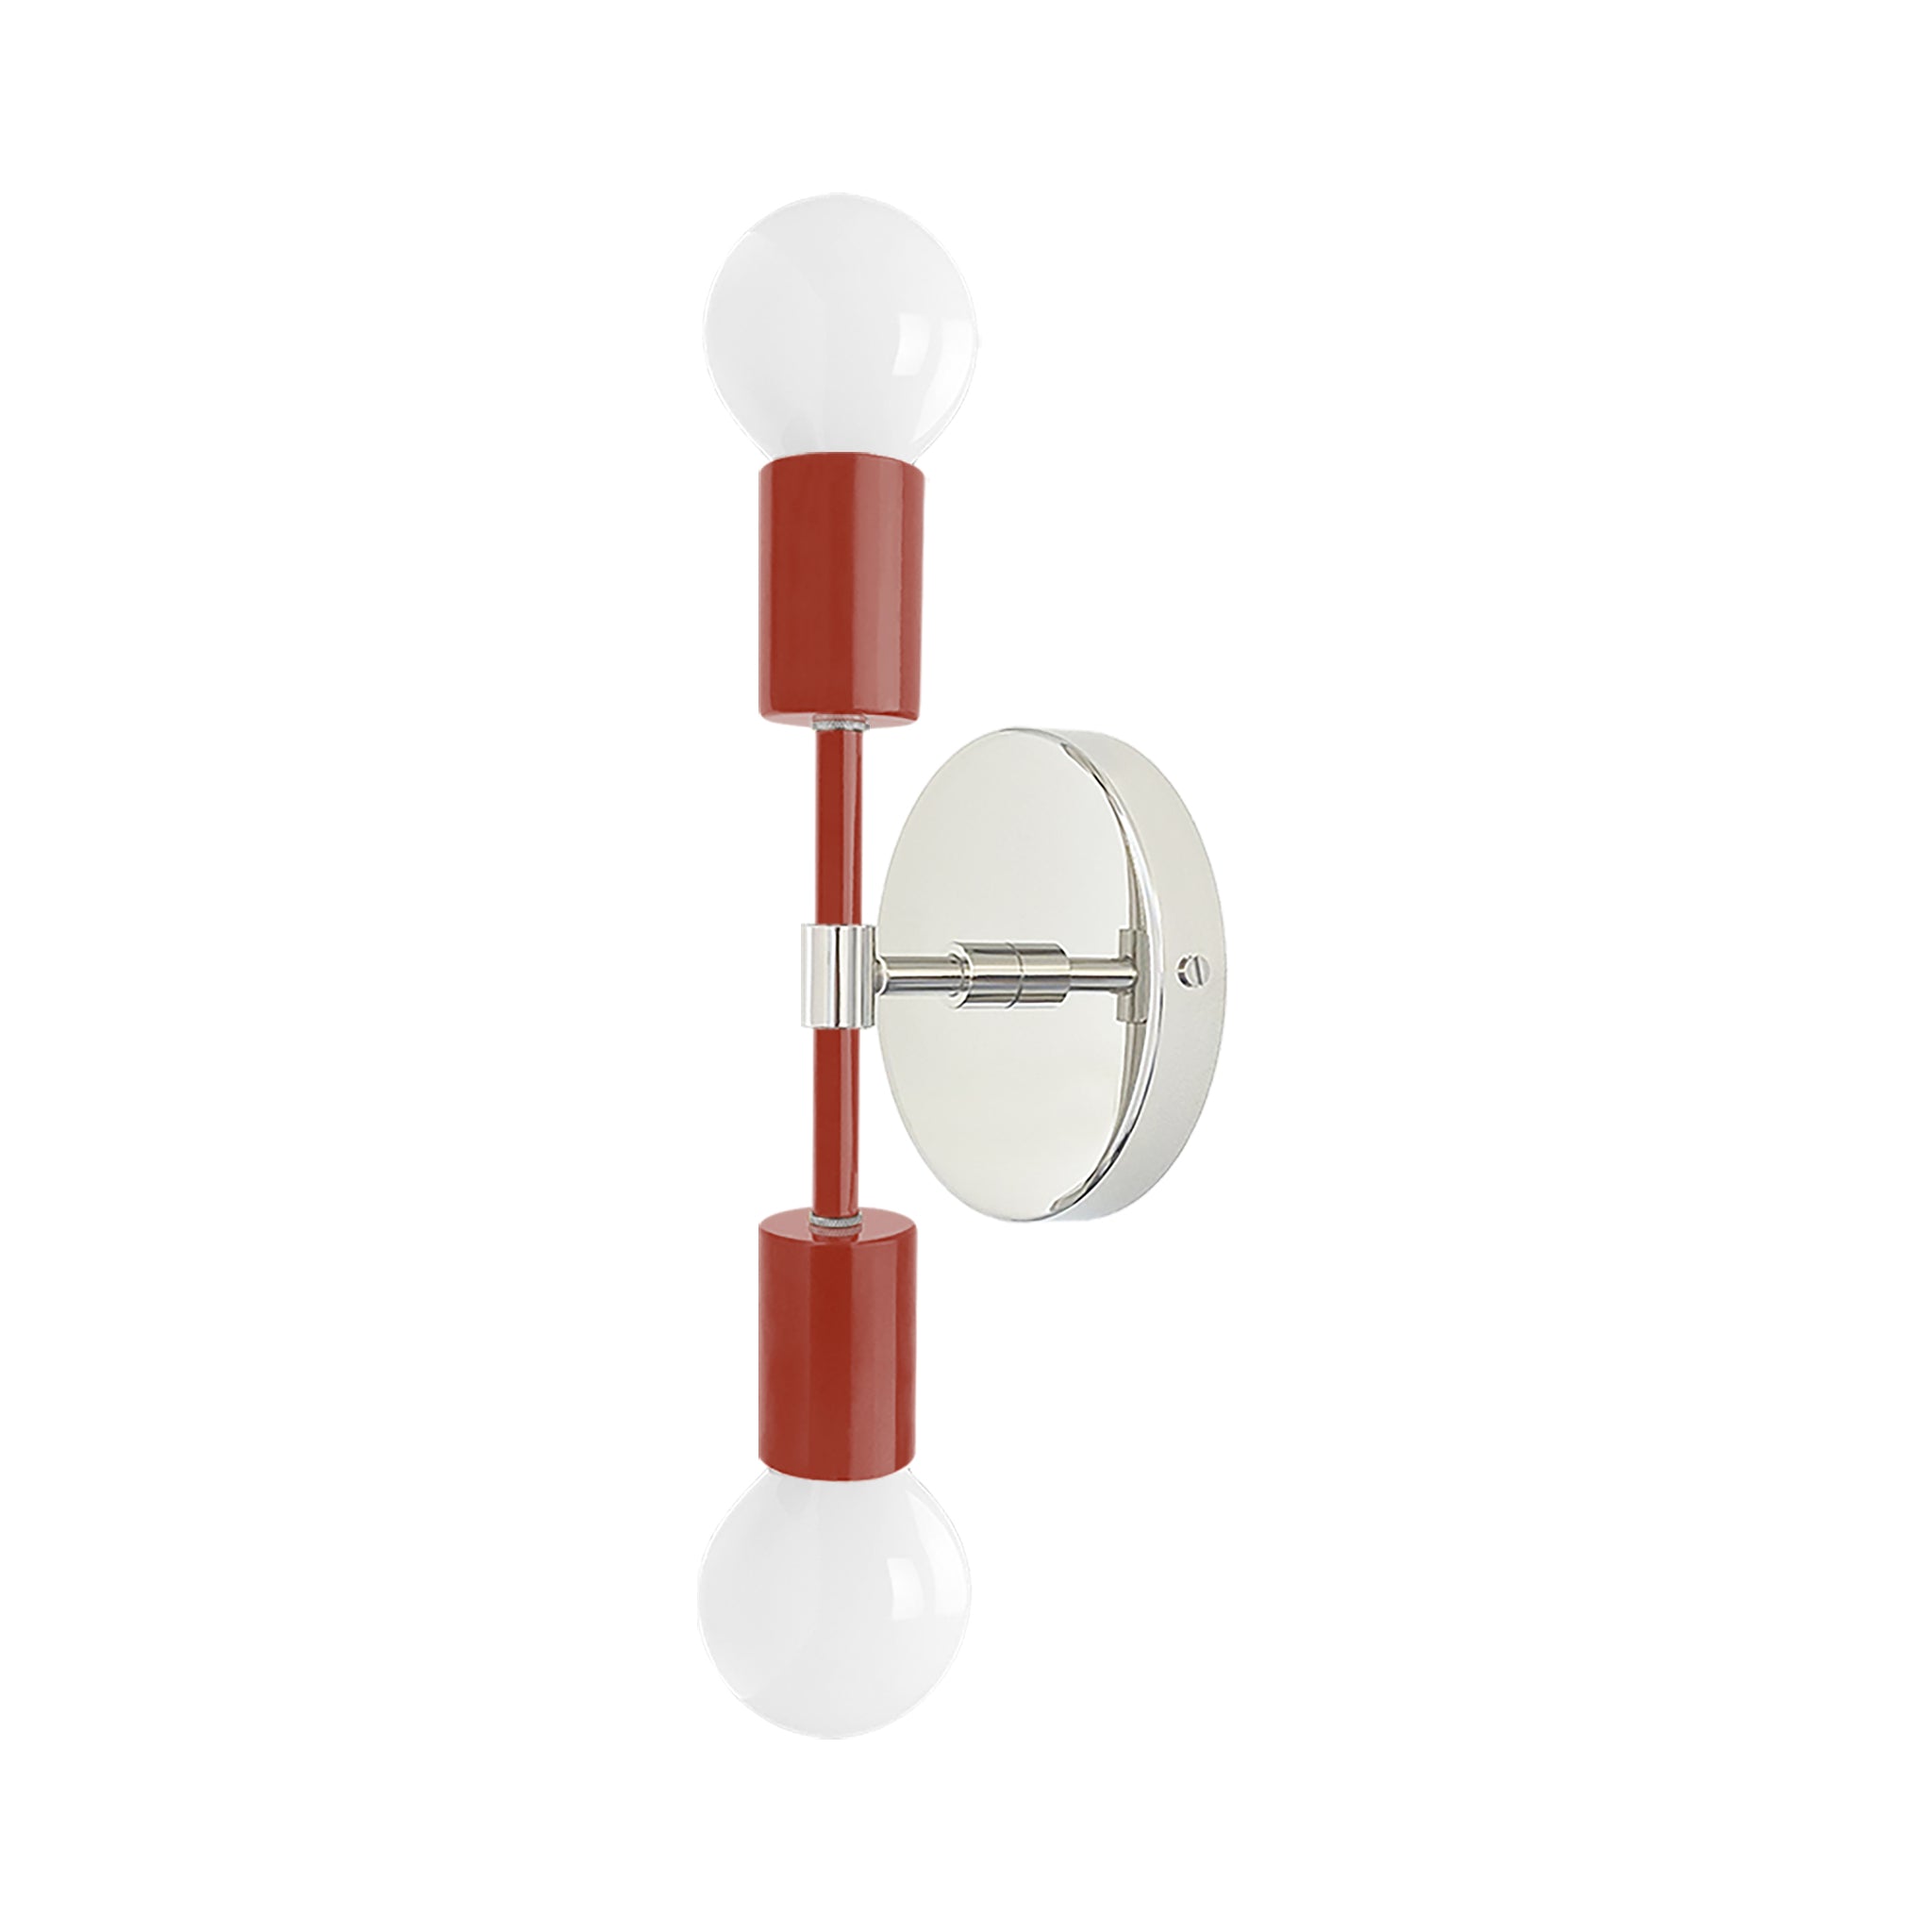 Nickel and riding hood red color Scepter sconce 10" Dutton Brown lighting